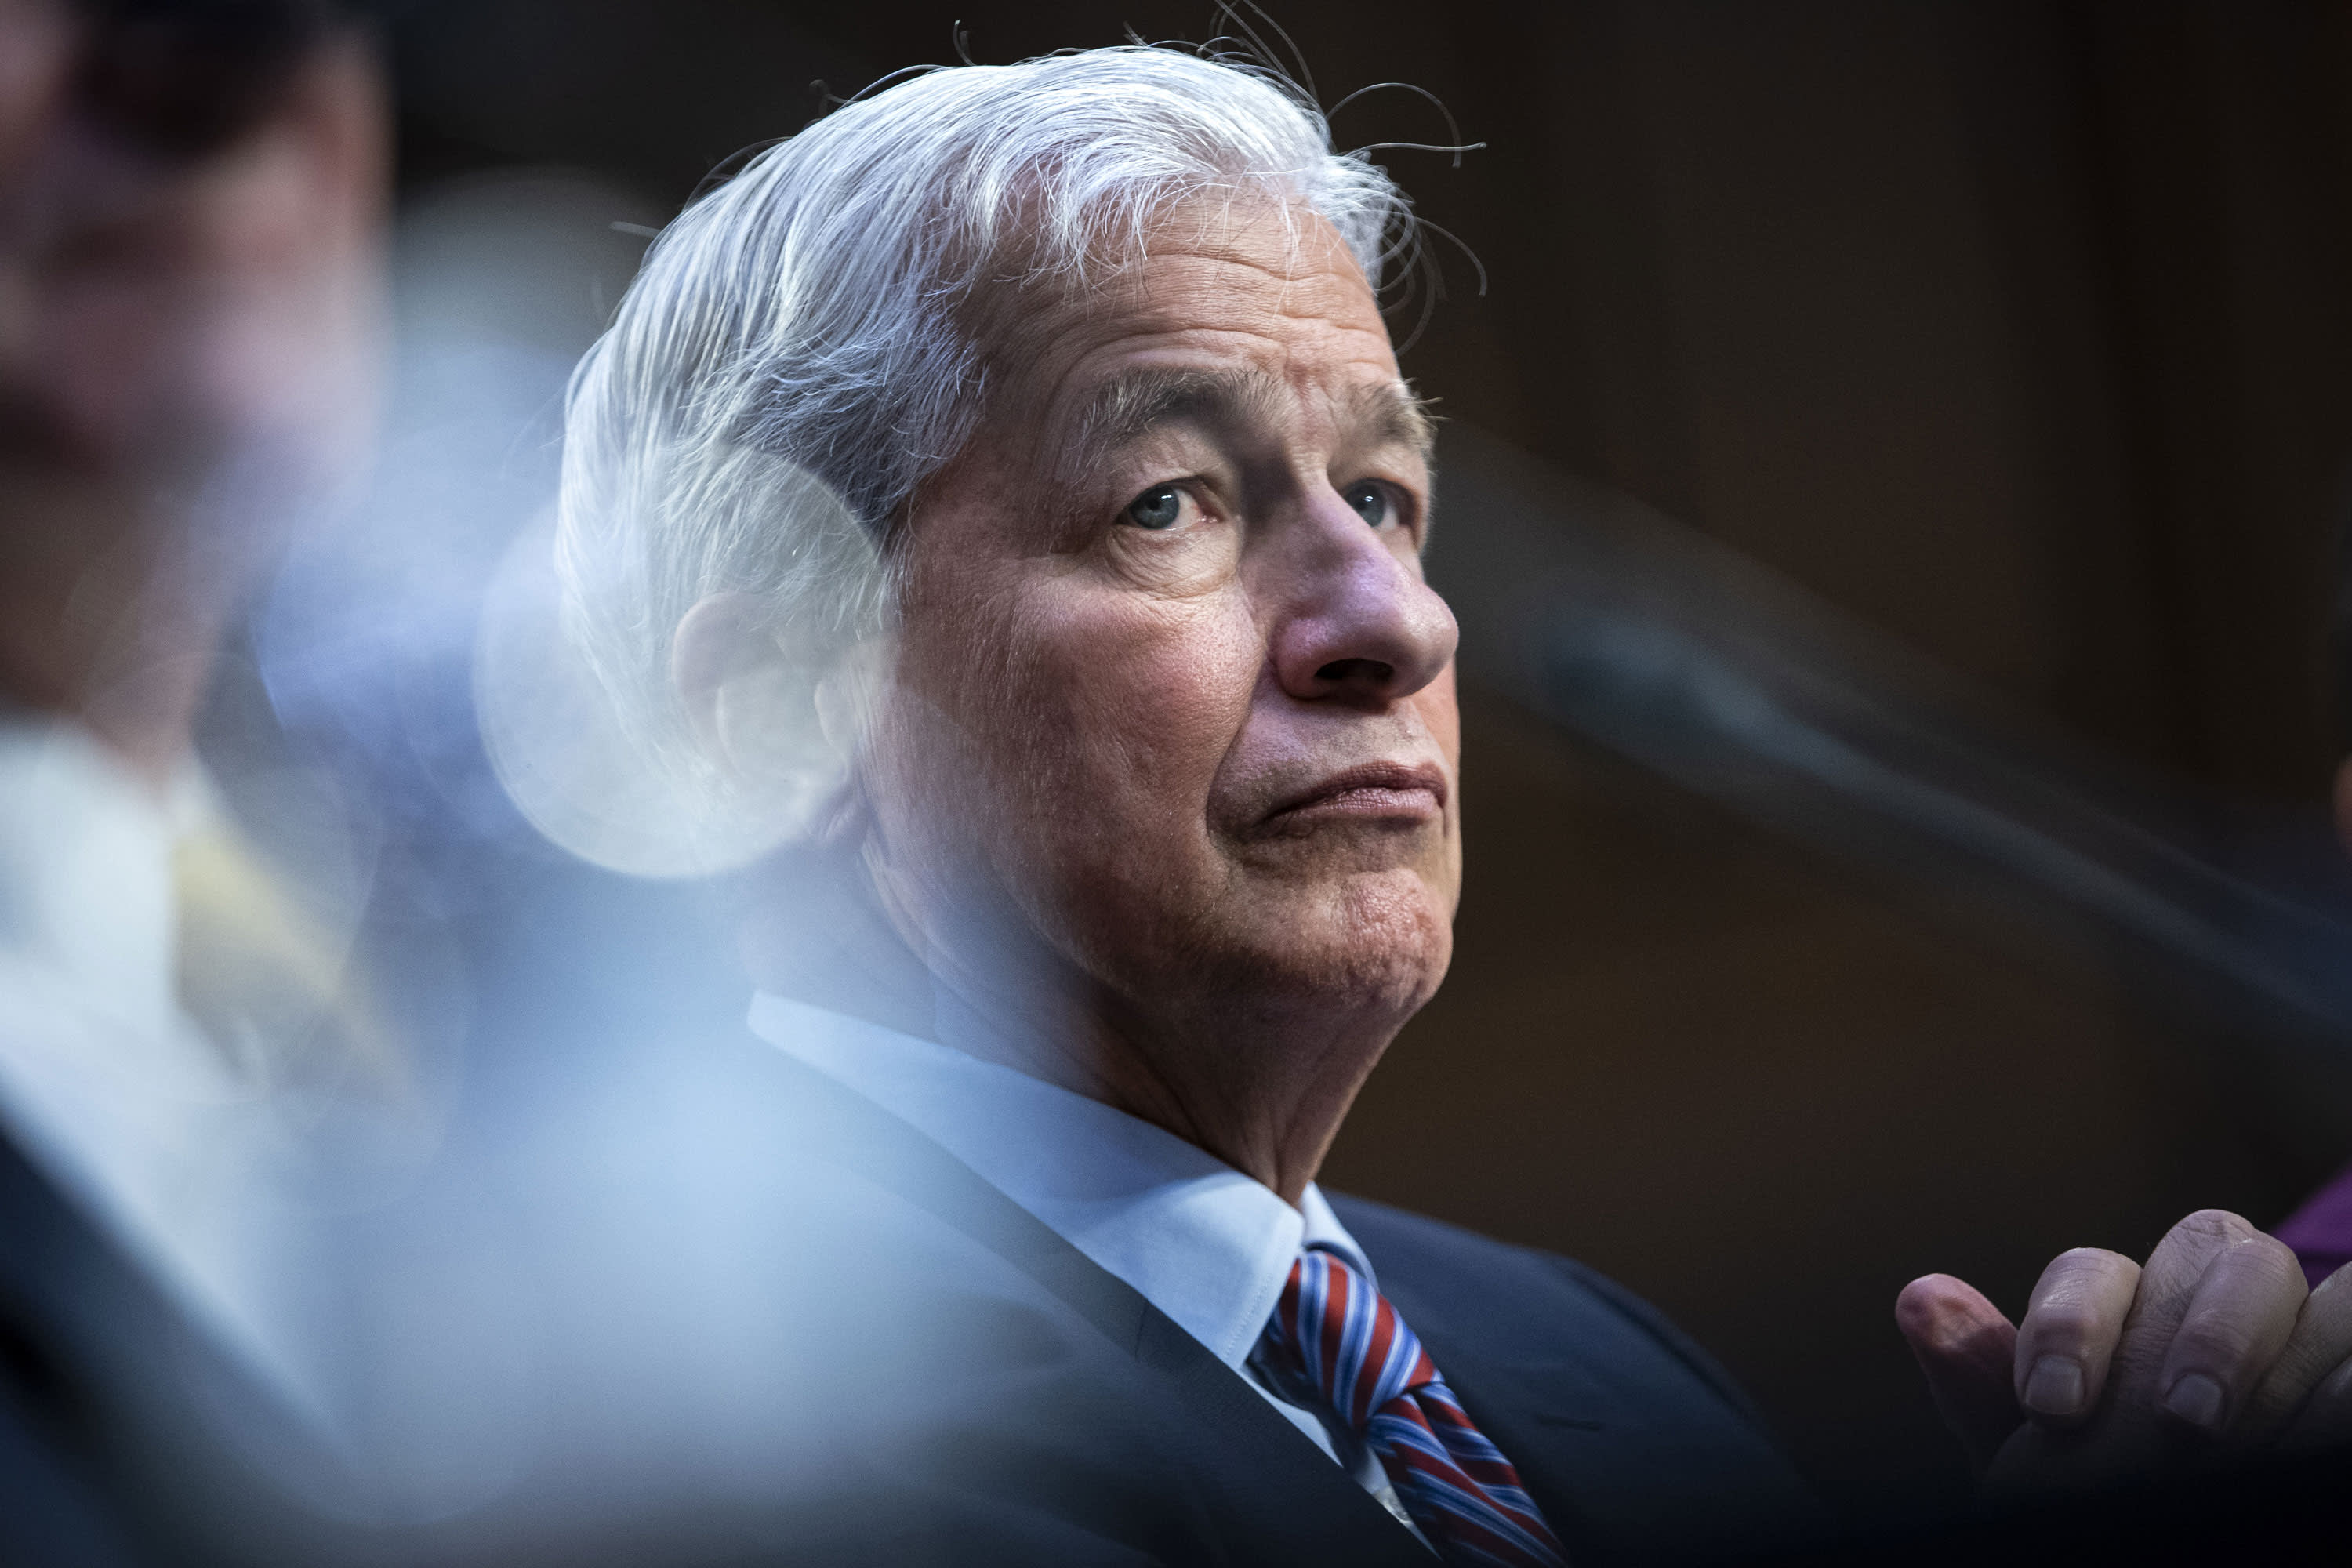 JPMorgan rejects claim Dimon discussed Epstein with Staley